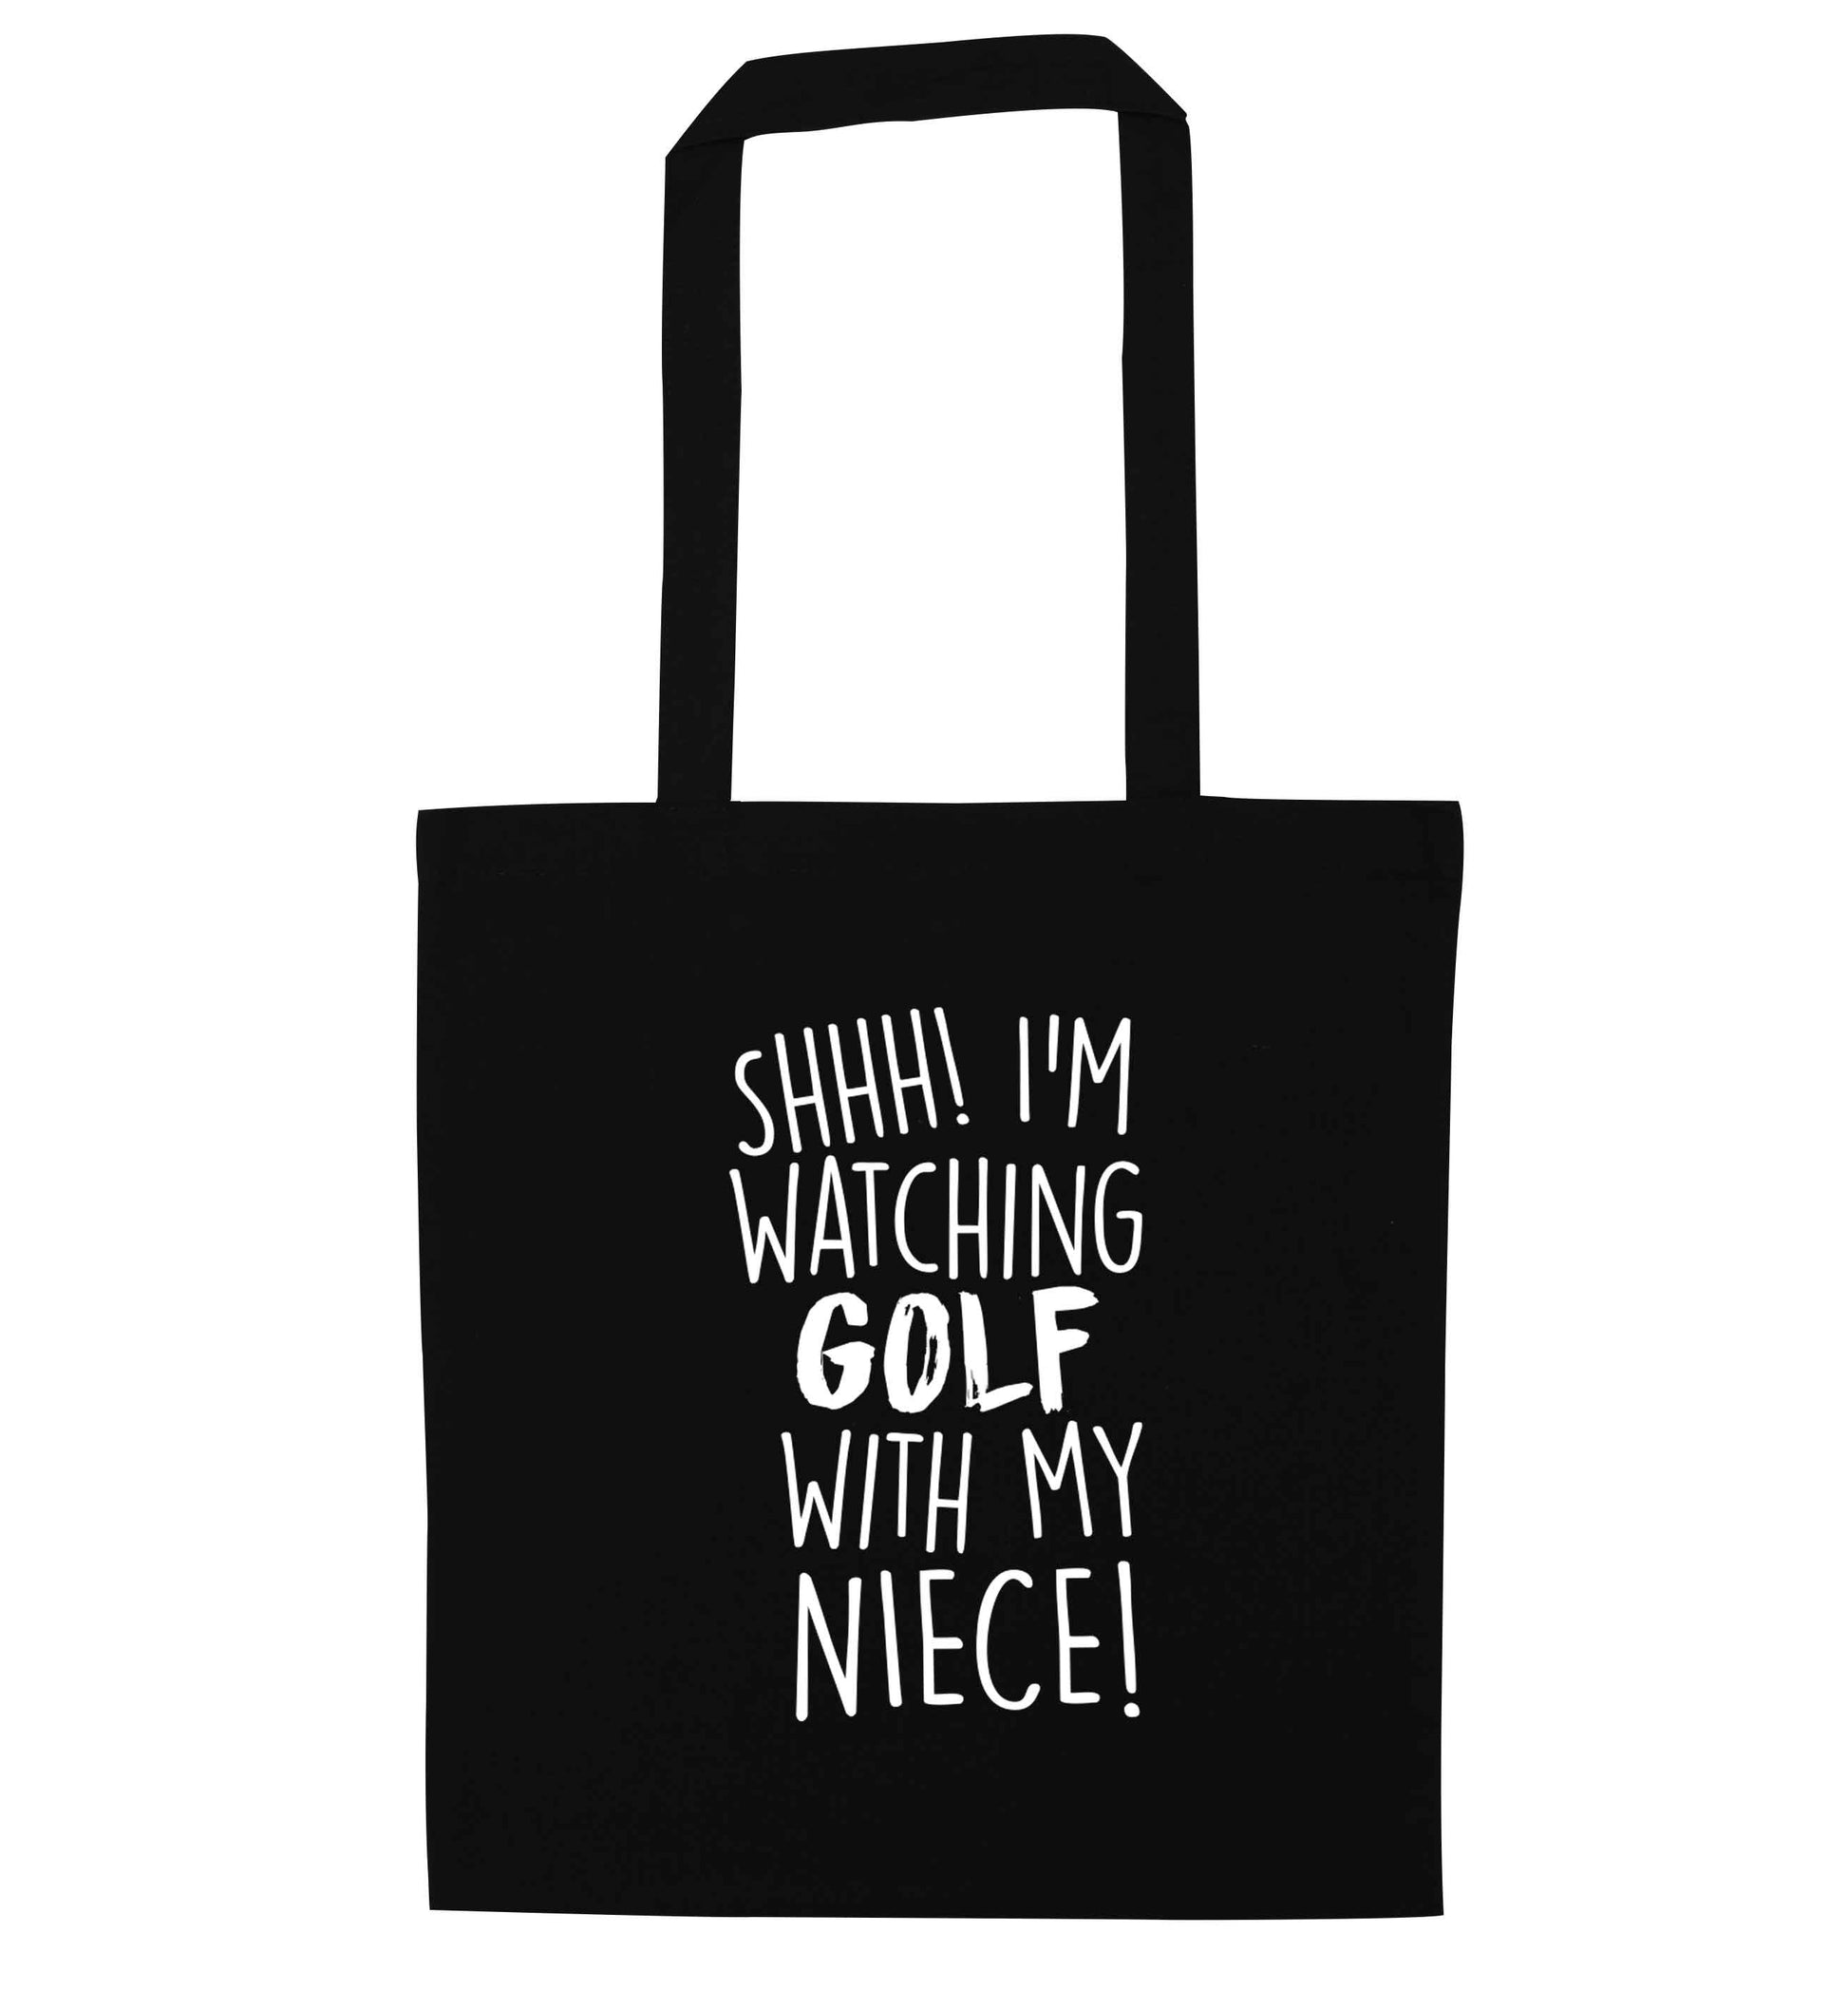 Shh I'm watching golf with my niece black tote bag